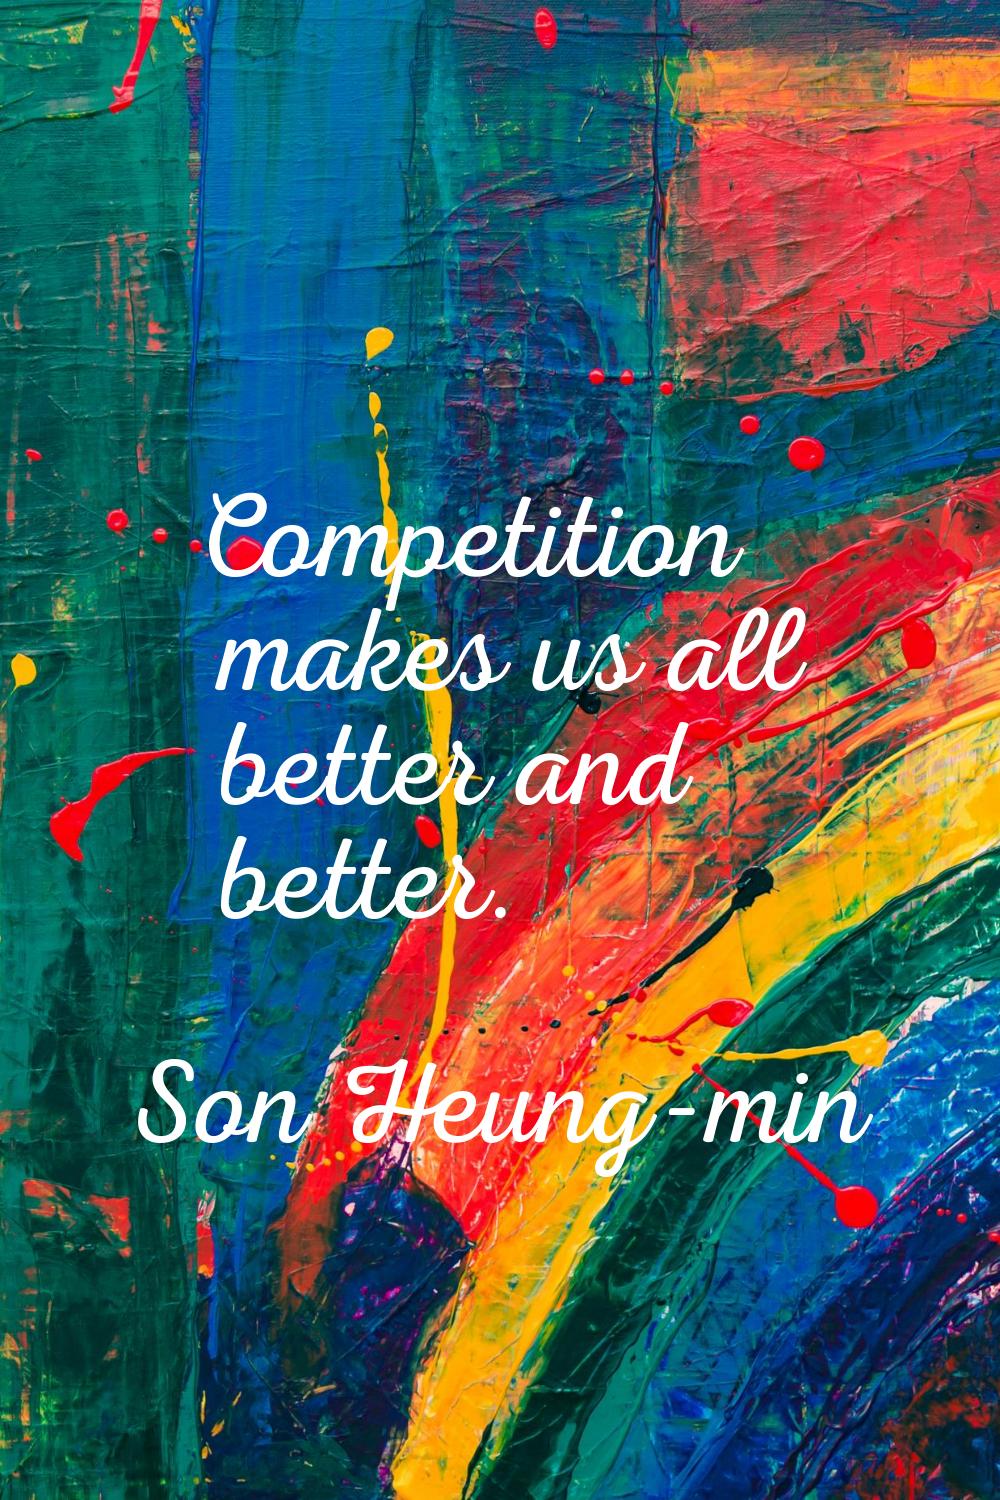 Competition makes us all better and better.